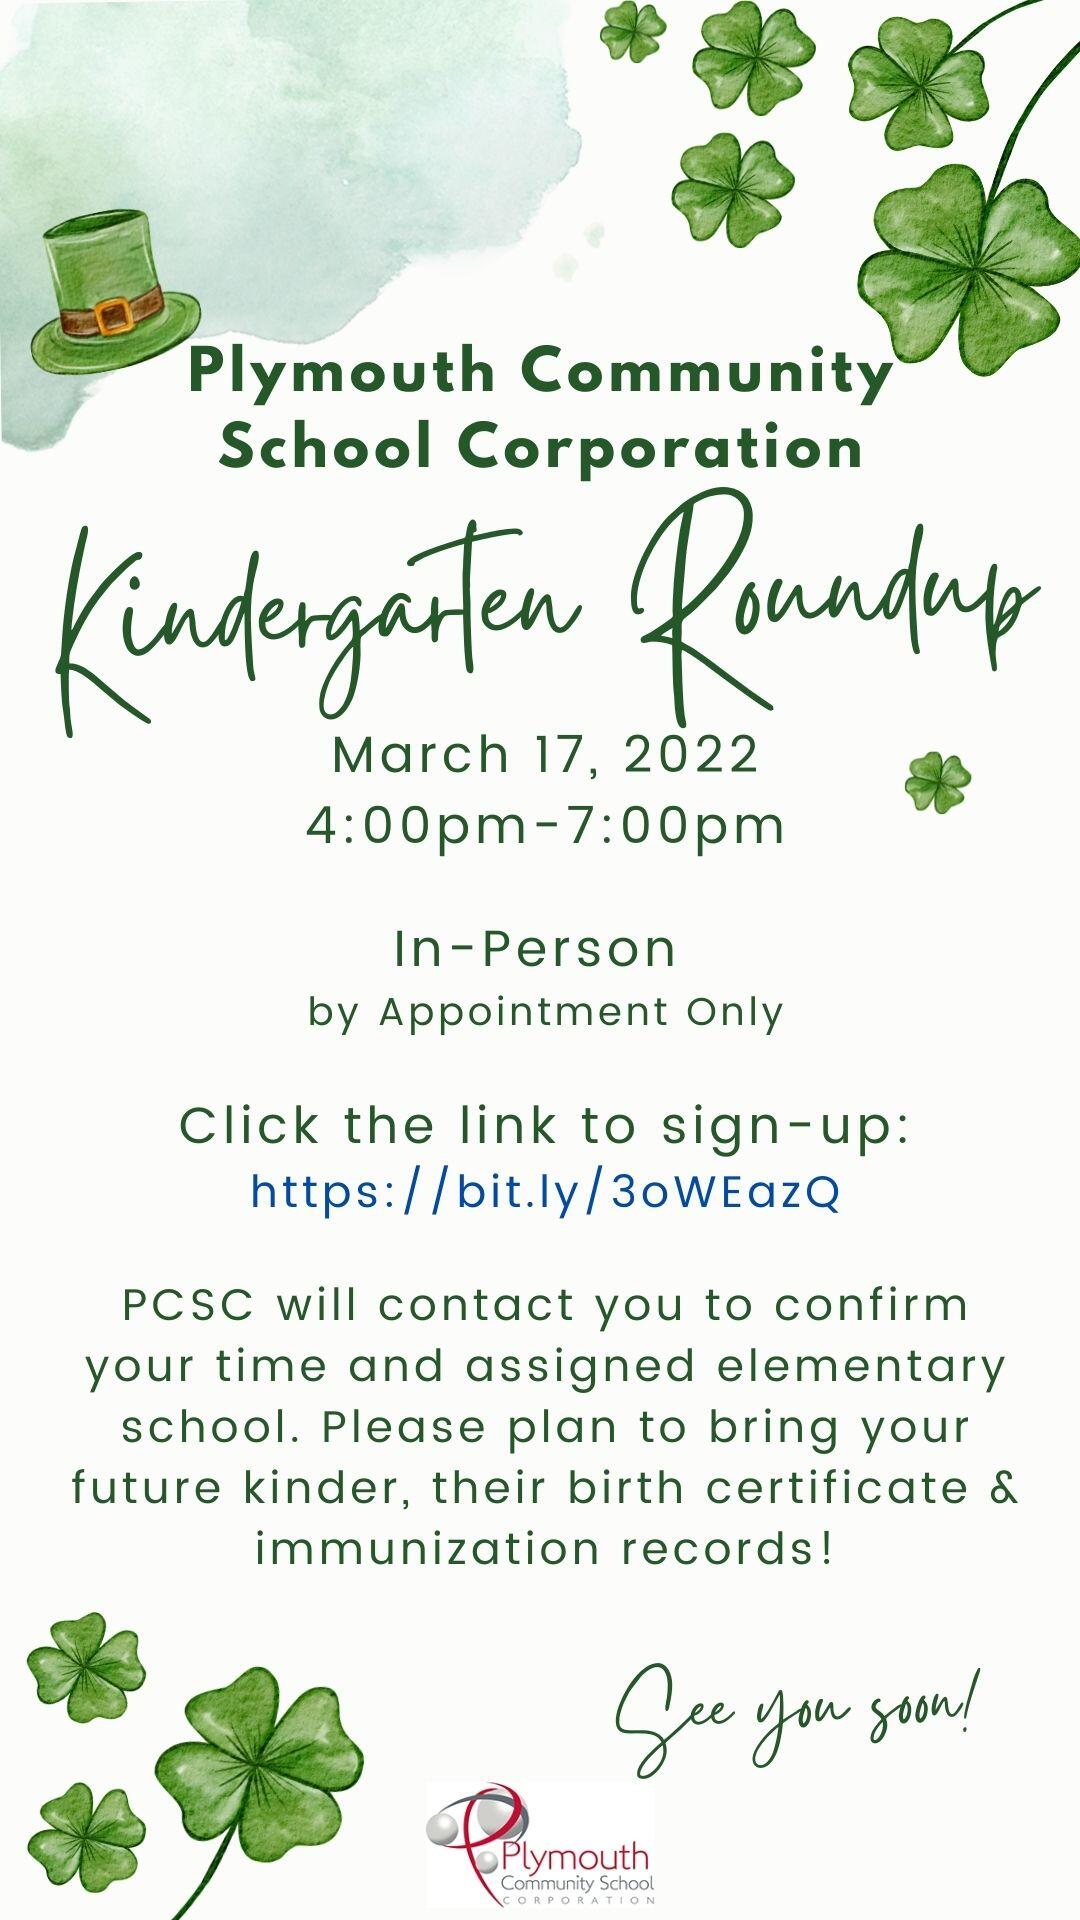 Plymouth Community School Corporation Kindergarten Roundup on March 17, 2022 from 4:00 p.m.-7:00 p.m.  In-person by appointment only  Click the link to sign-up:  Kindergarten Roundup Sign-up Sheet  PCSC will contact you to confirm your time and assigned elementary school. Please plan to bring your future kinder, their birth certificate & immunization records!  See you soon!